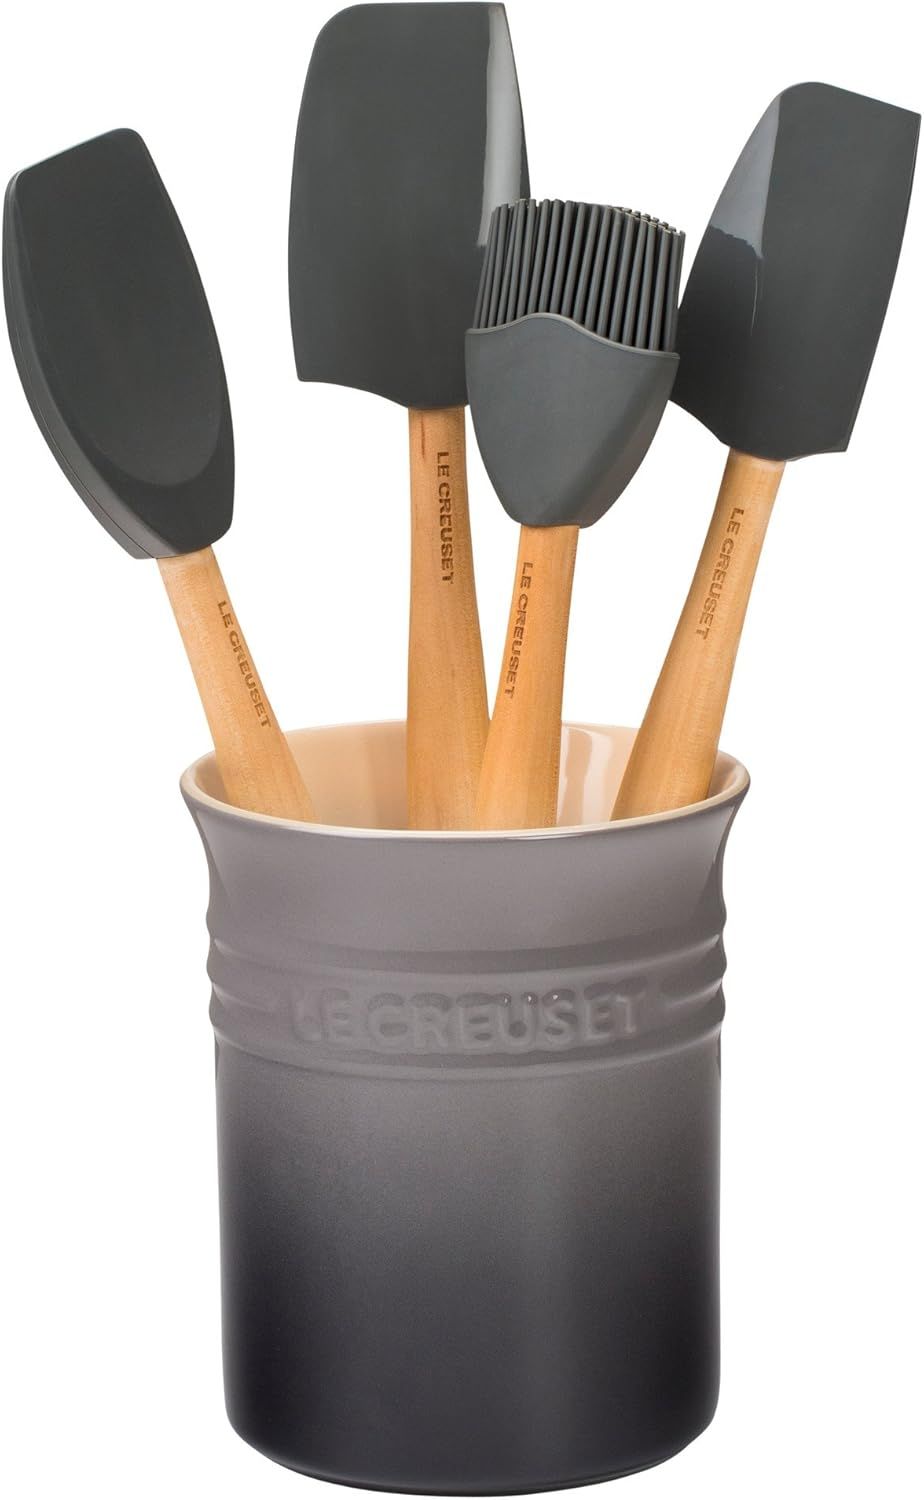 Le Creuset Silicone Craft Series Utensil Set with Stoneware Crock, 5 pc., Oyster | Amazon (US)